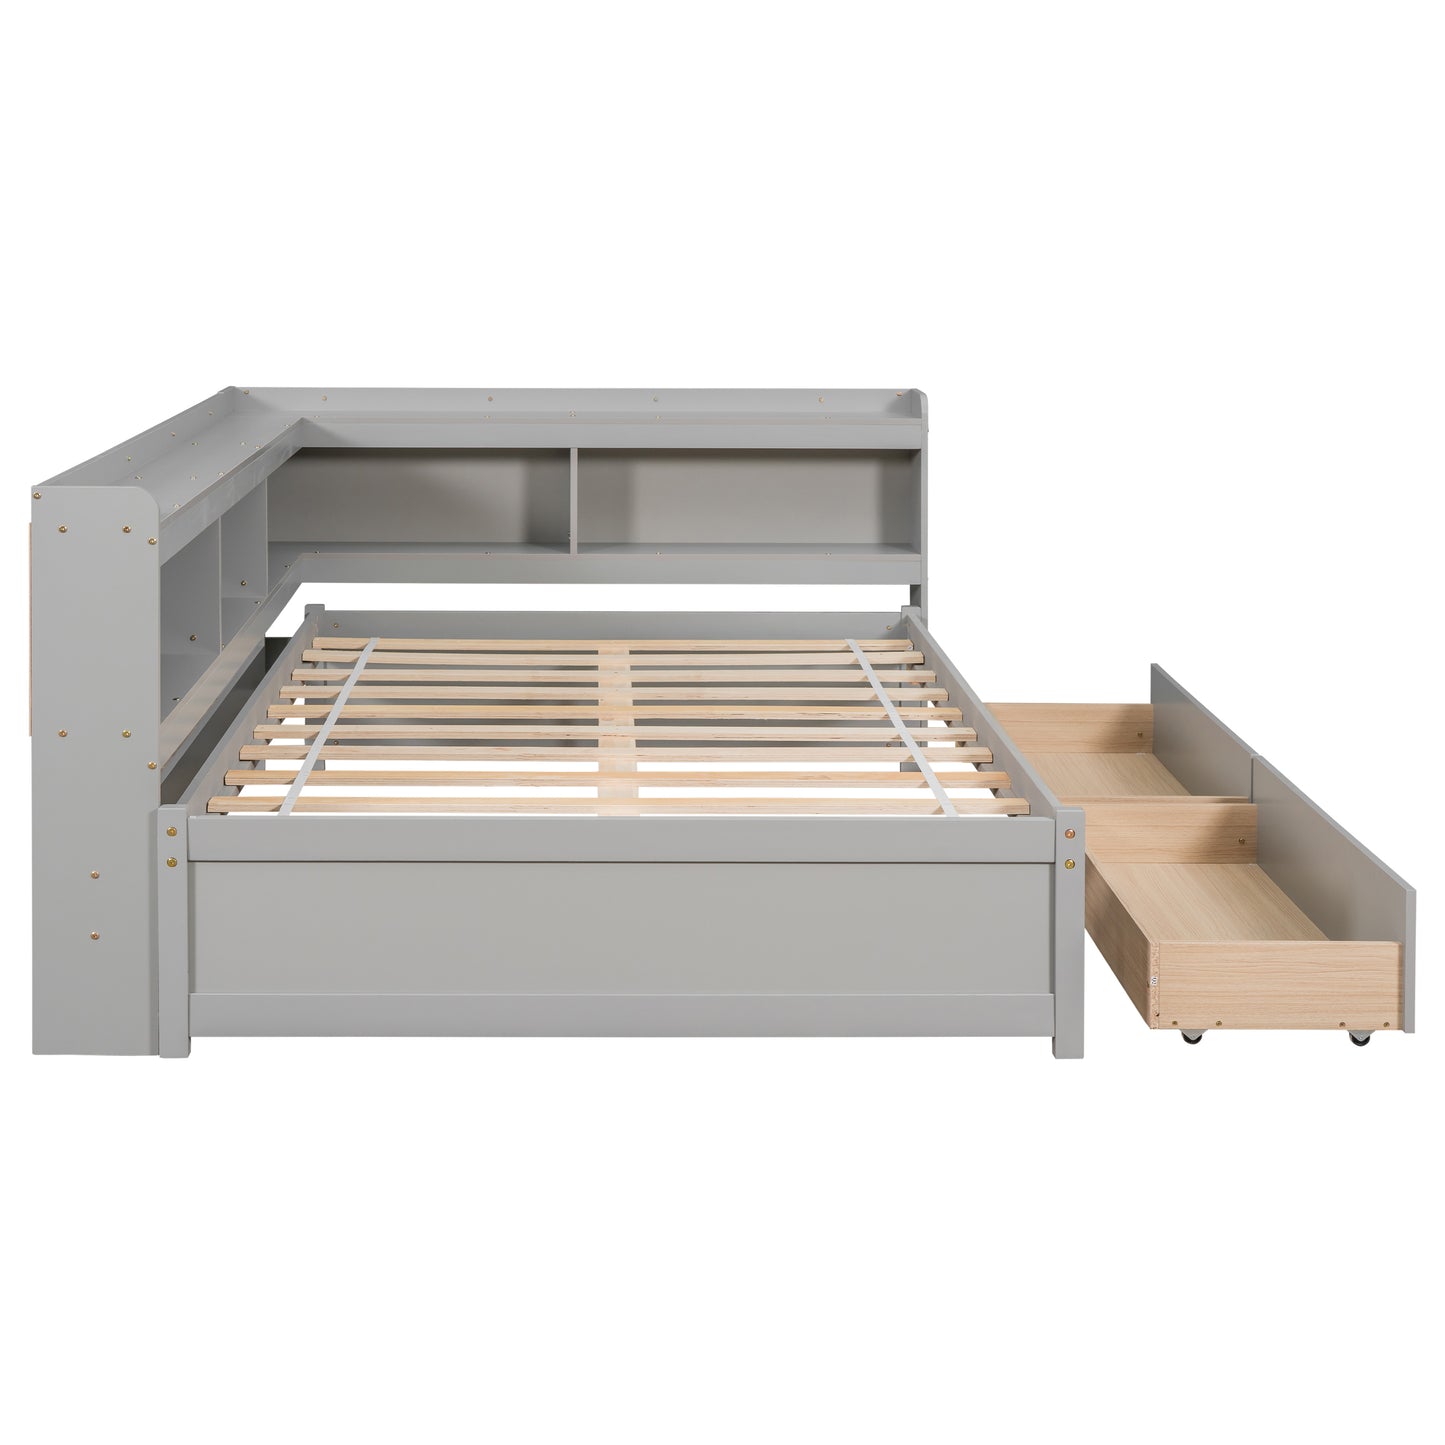 Full Platform Bed with L-shaped Bookcases, Drawers, Grey